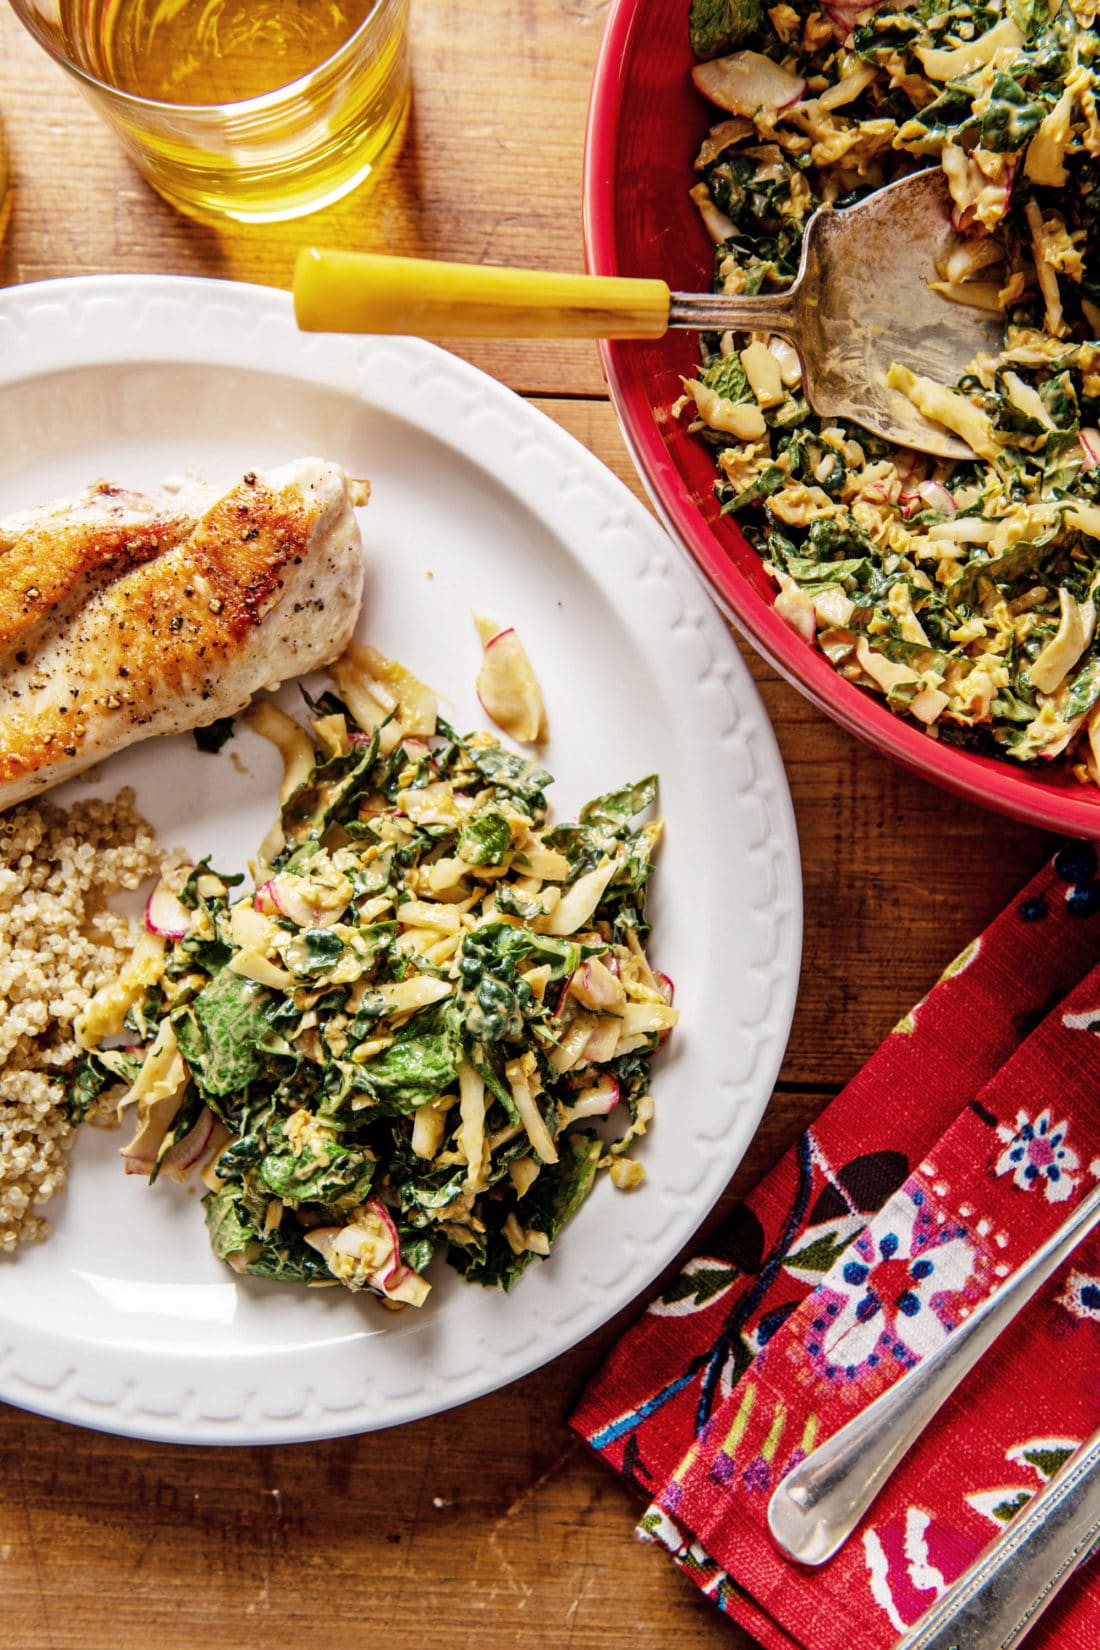 Plate with Kale, Cabbage and Mint Salad with Peanut Dressing, grains, and chicken.